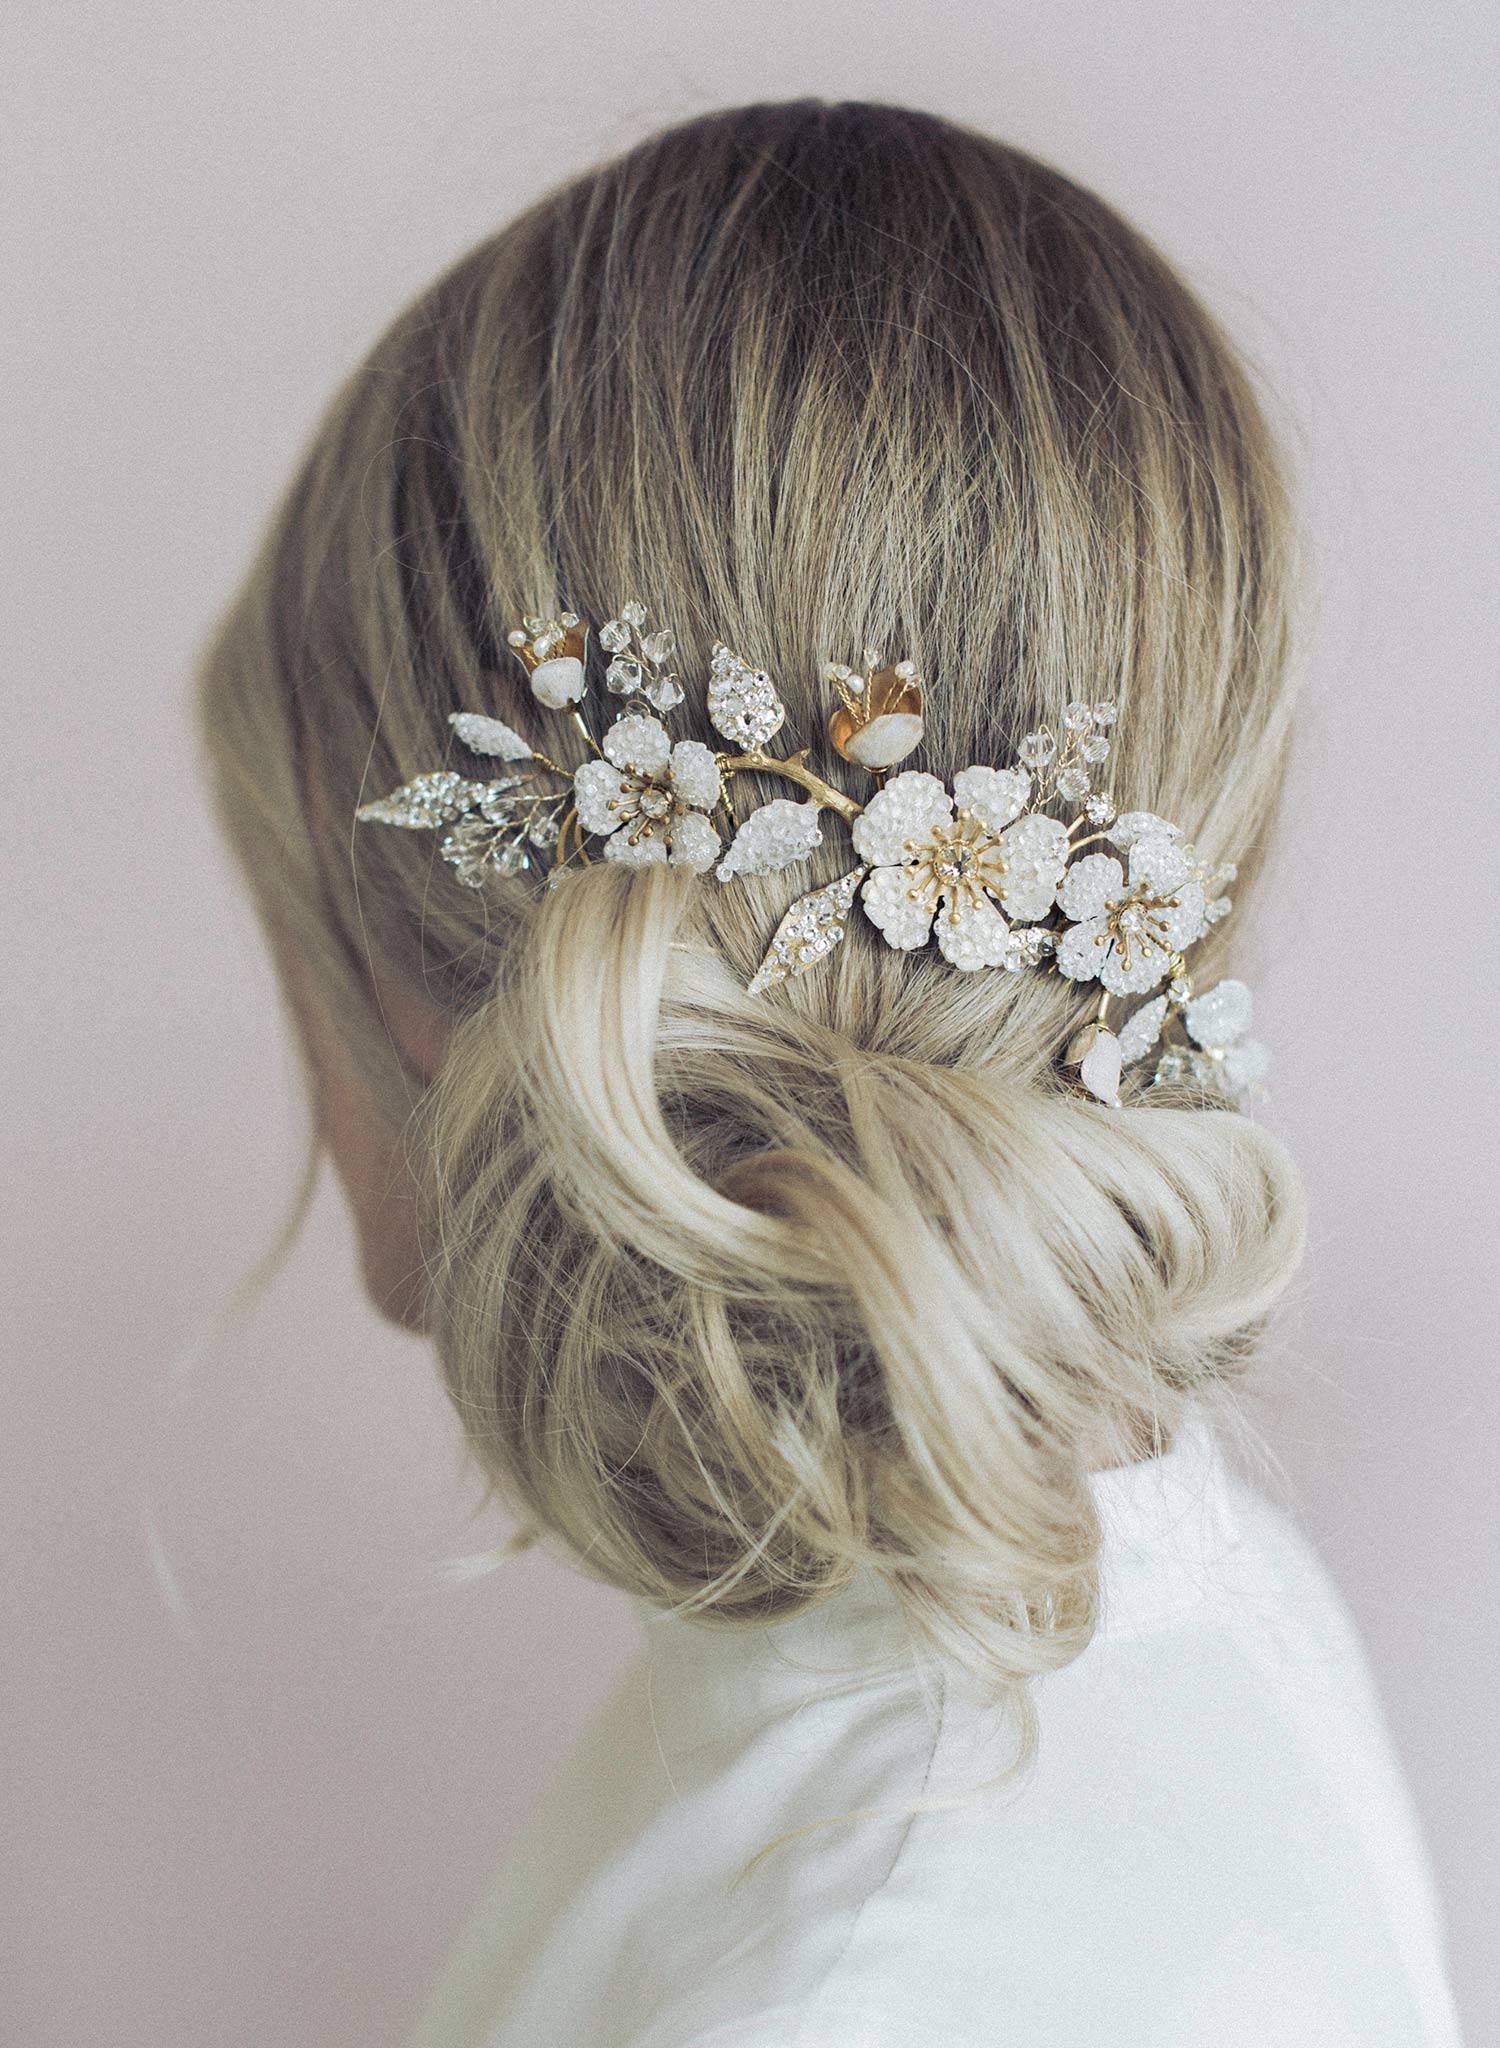 Crystal encrusted flower and bud headpiece - Style #930